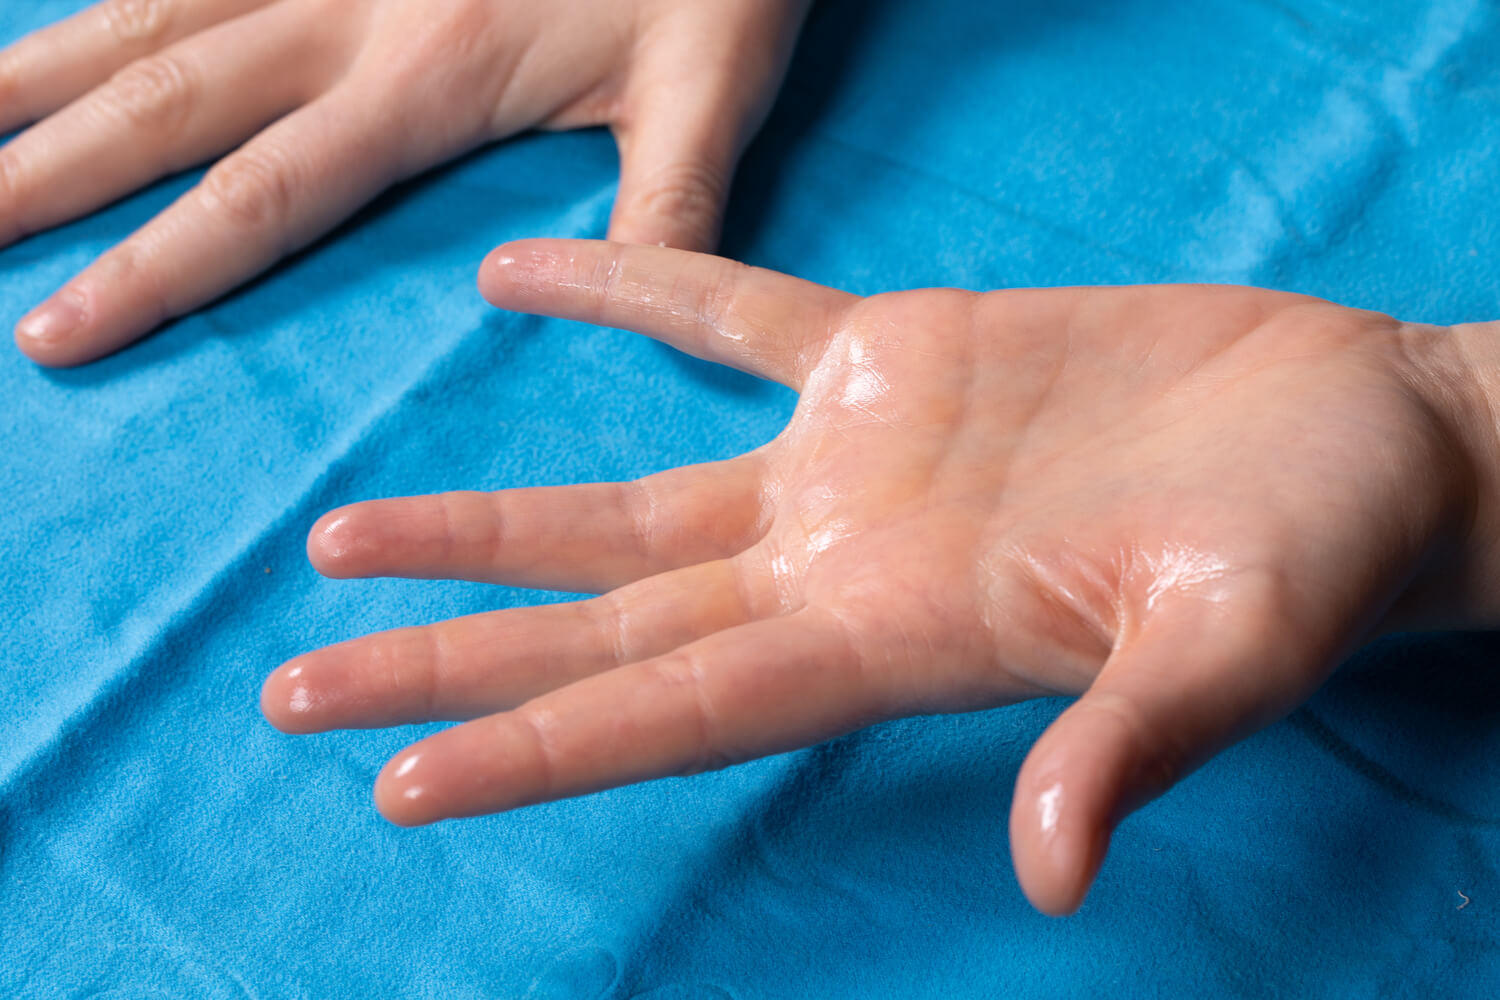 woman with excessively sweaty hands from hyperhidrosis receiving treatment at Garza Plastic Surgery